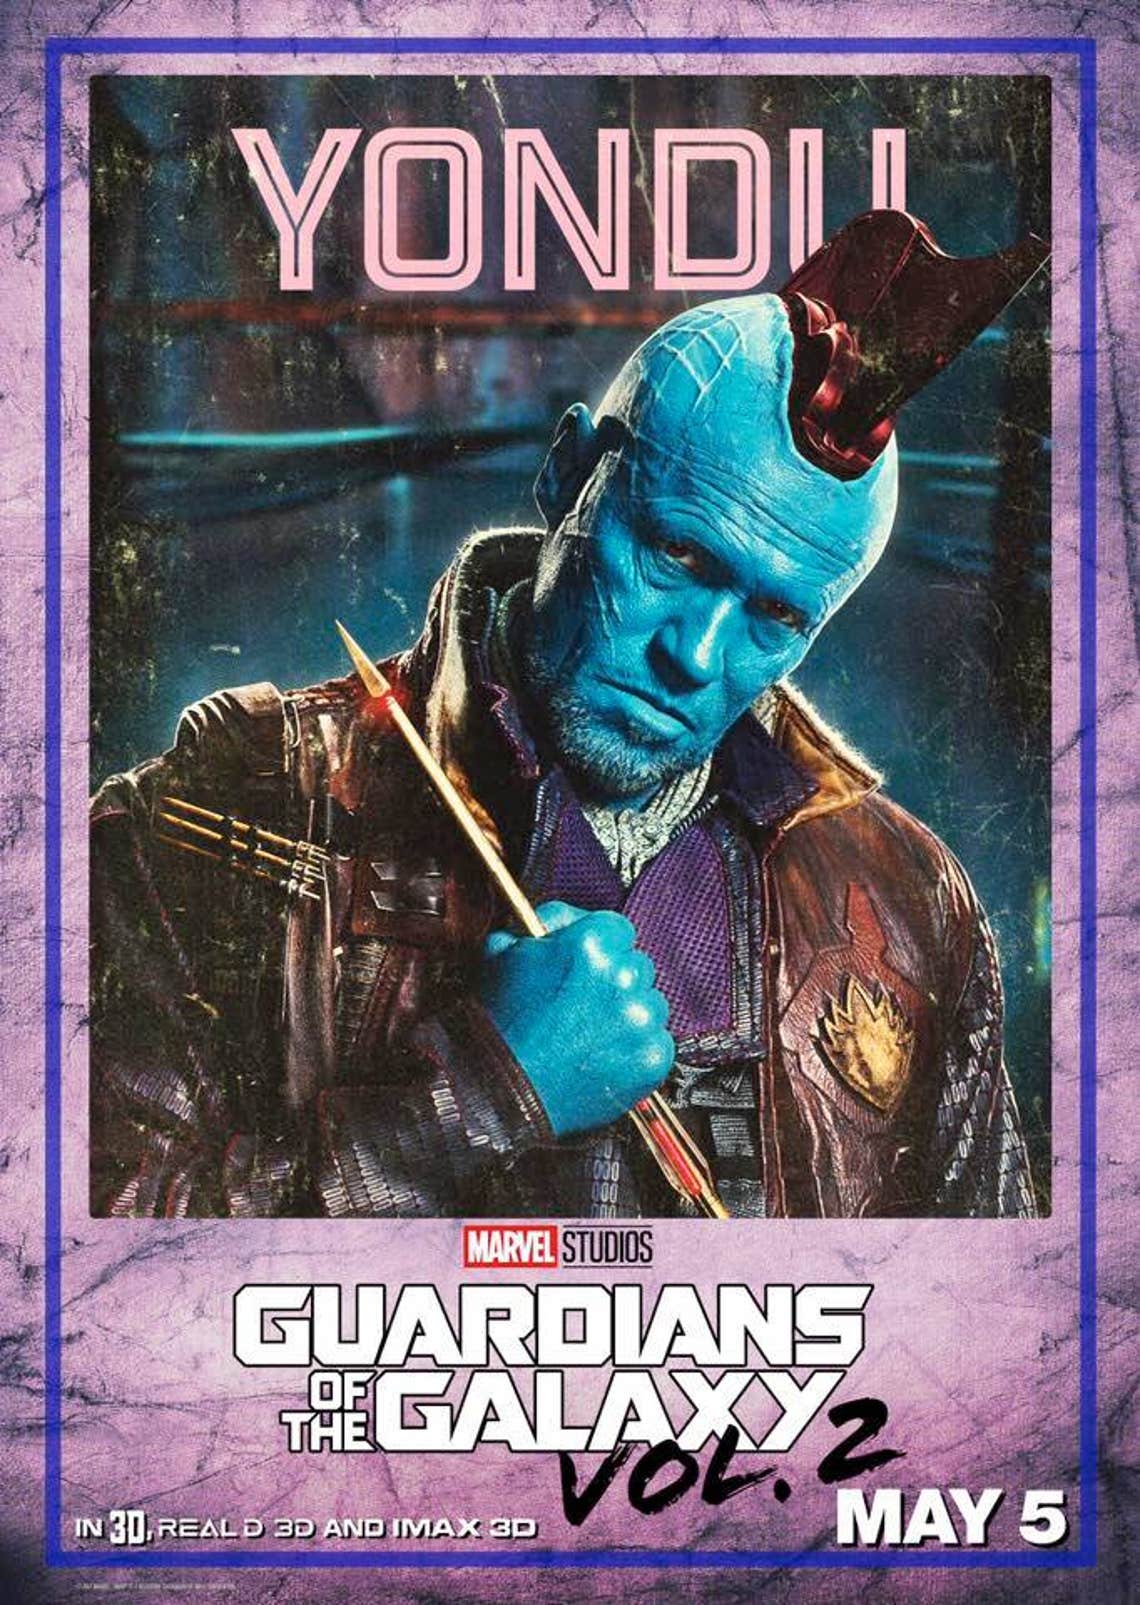 Guardians of the Galaxy 2' Character Posters Revealed